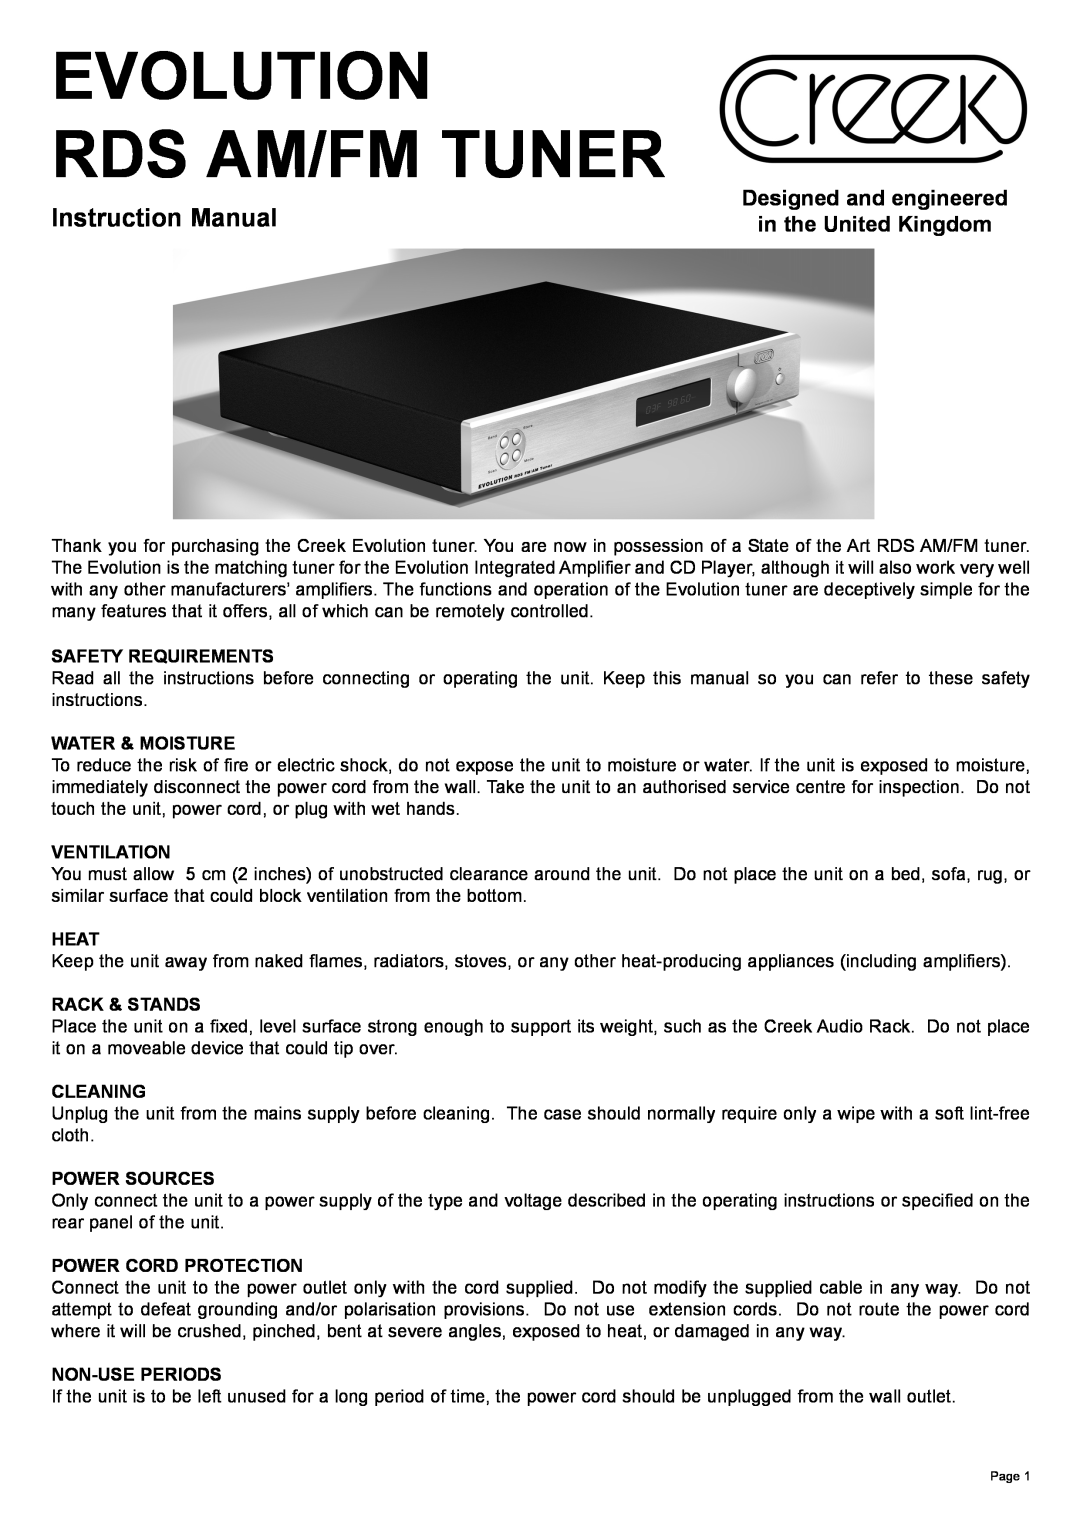 Creek Audio Evolution RDS instruction manual Evolution Rds Am/Fm Tuner, Designed and engineered in the United Kingdom 